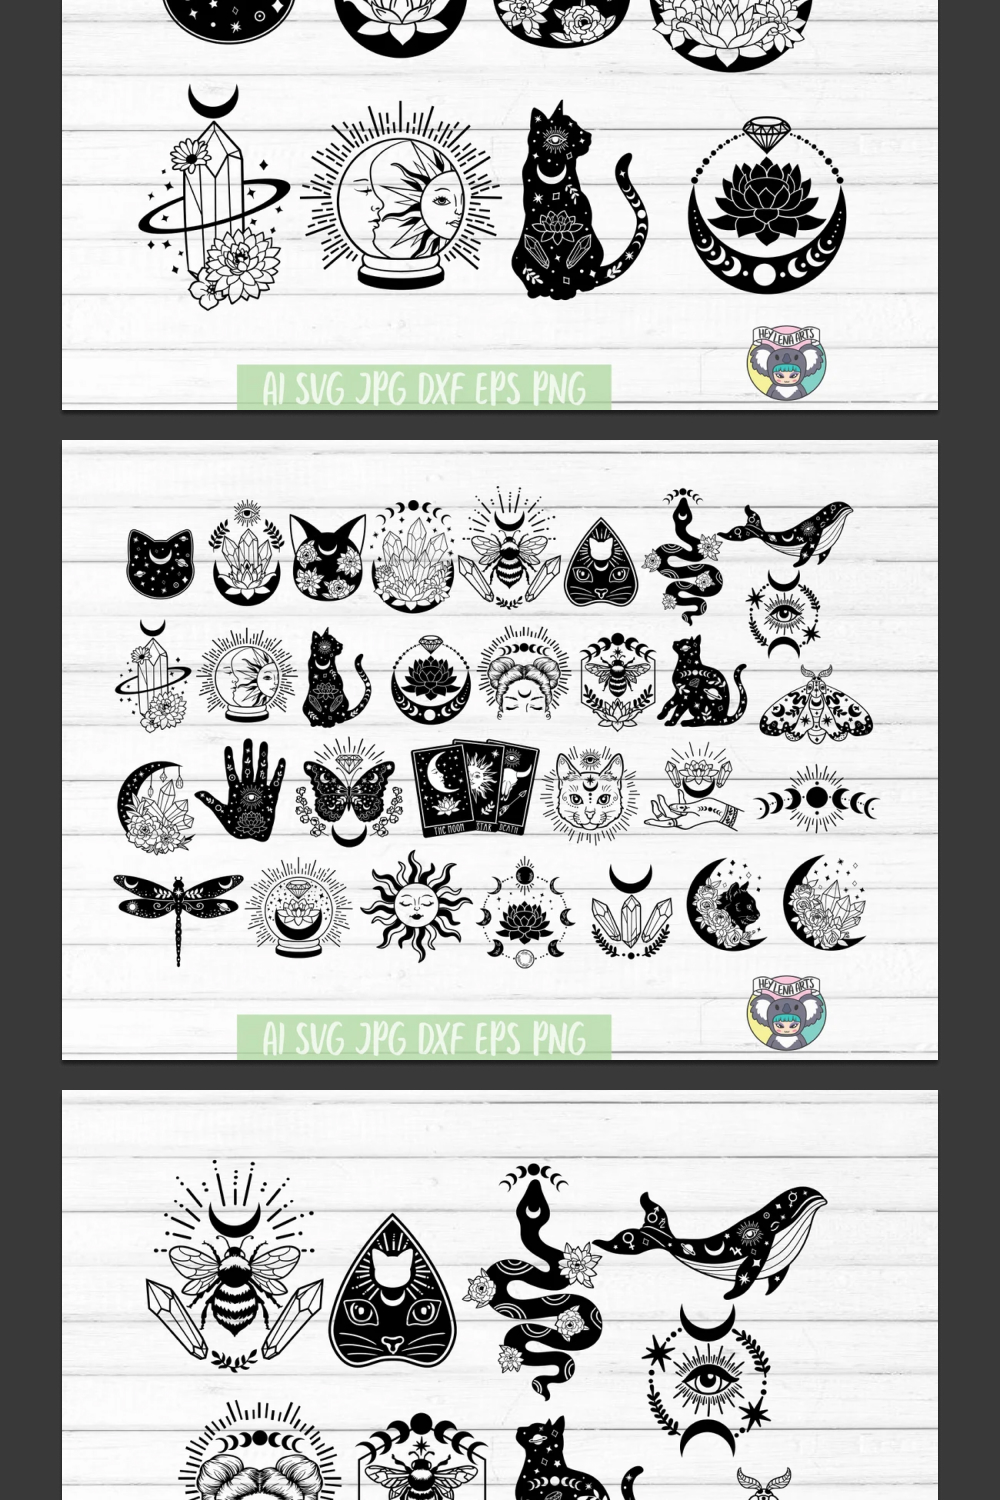 Icon image with various magical animals and symbols.